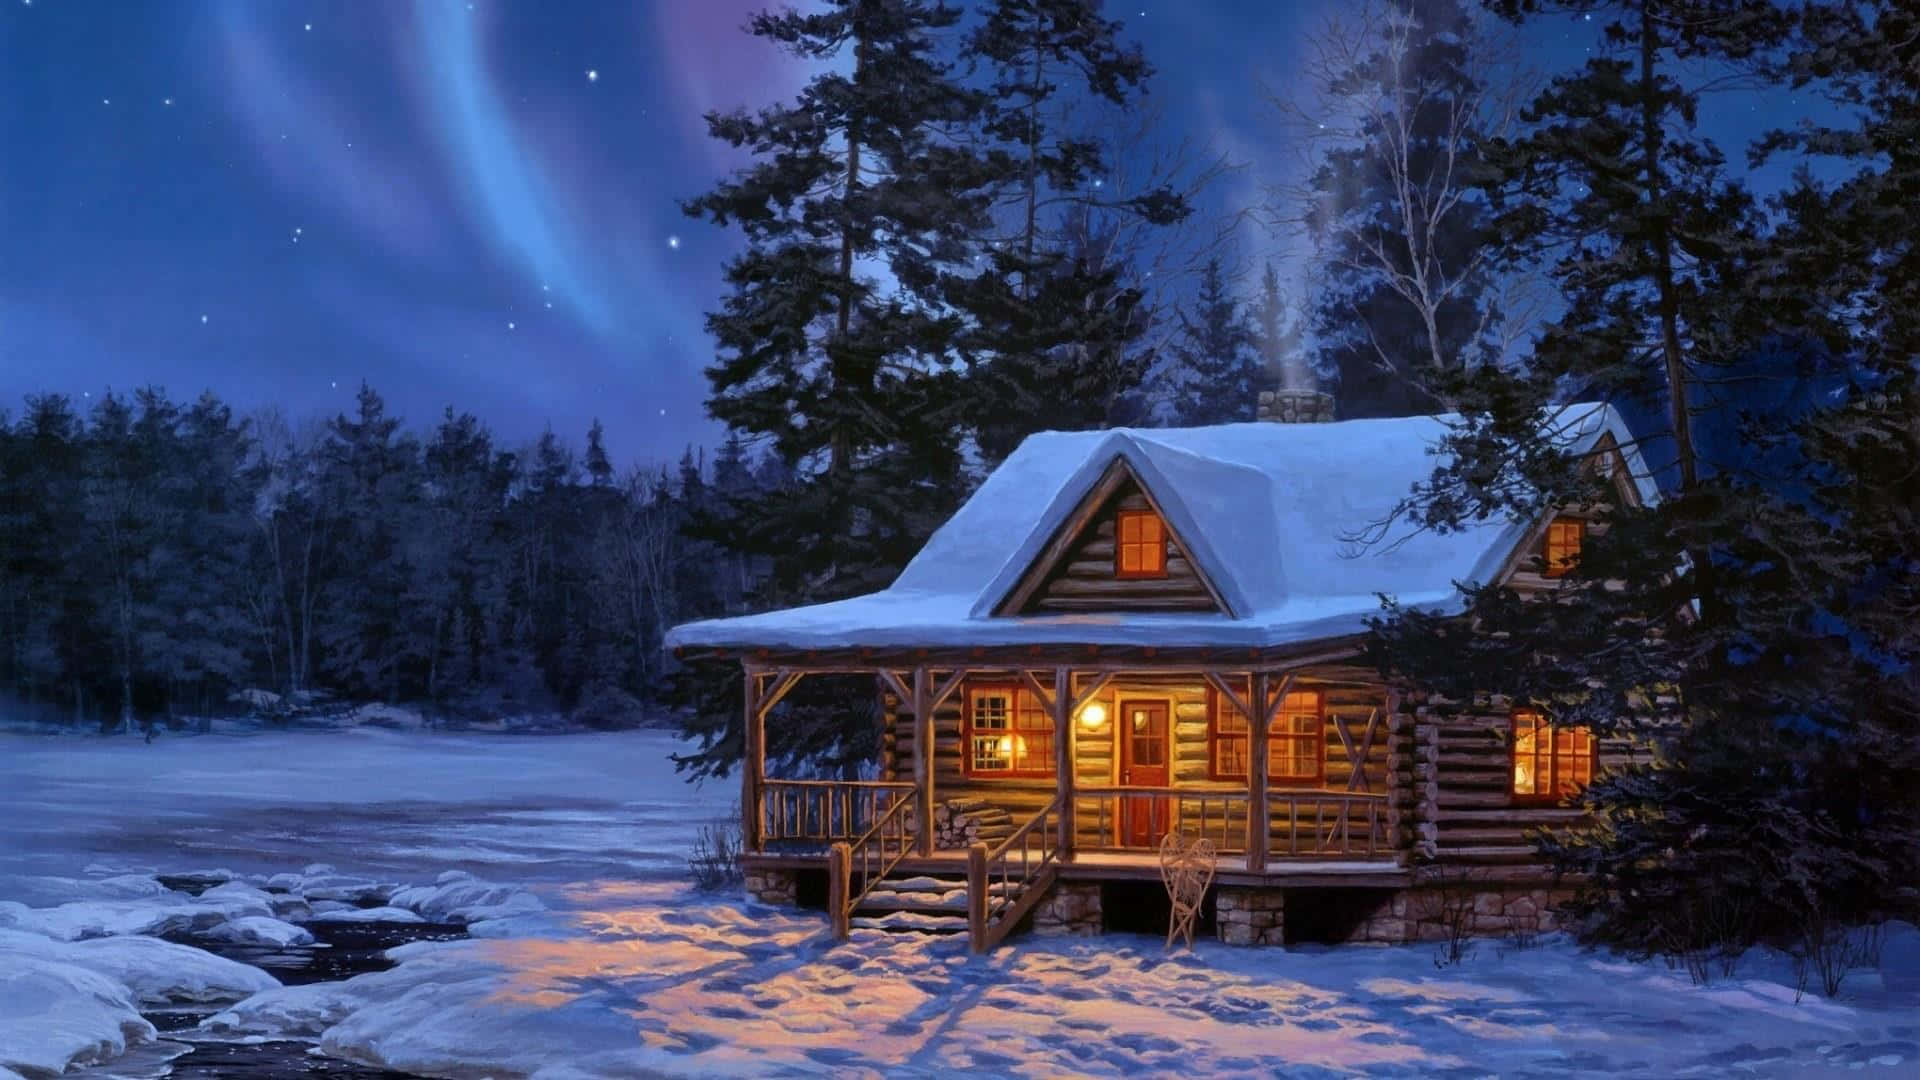 Experience the Beauty of Old Winter Wallpaper